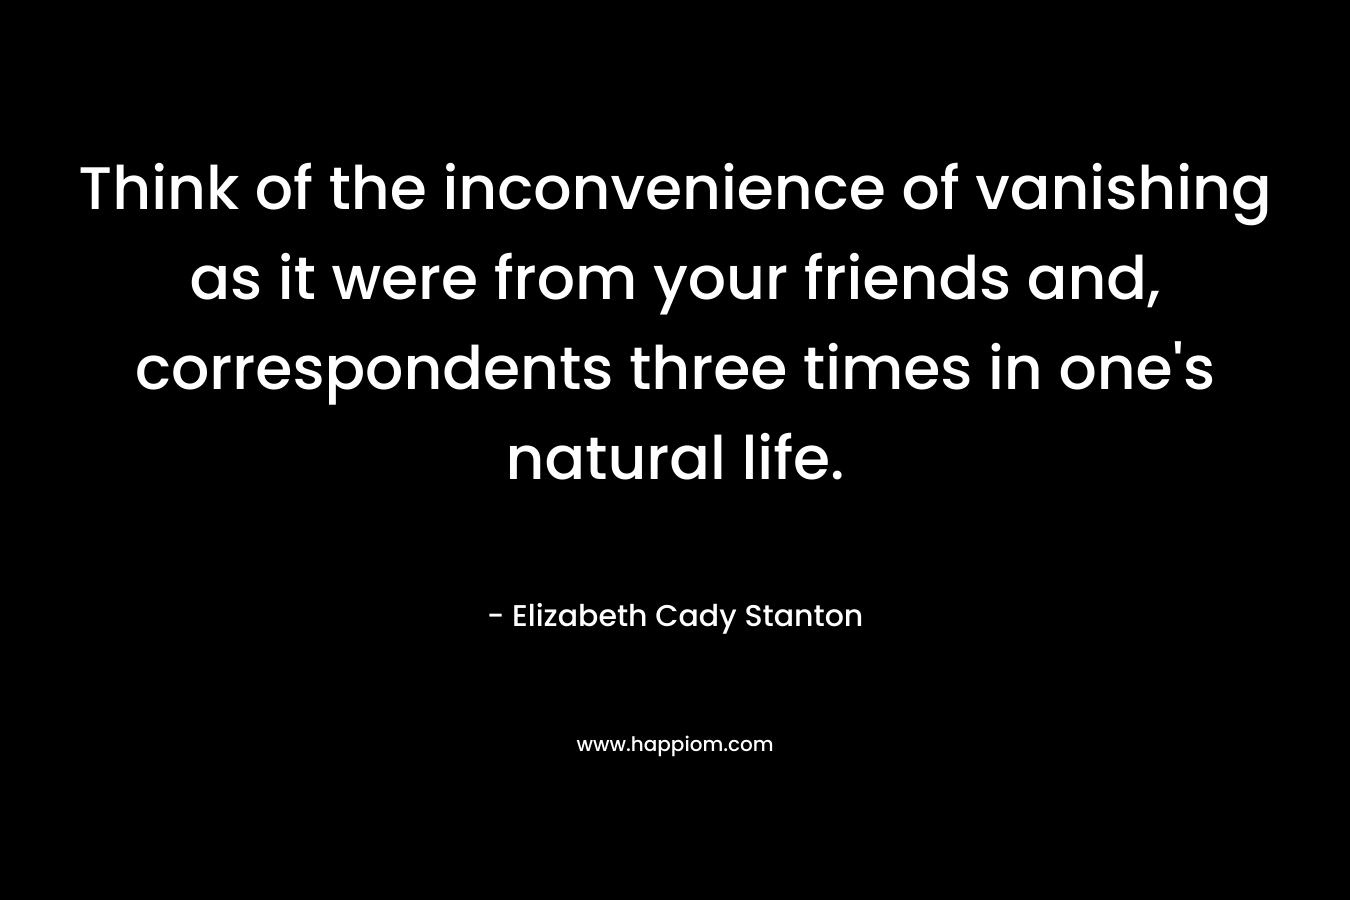 Think of the inconvenience of vanishing as it were from your friends and, correspondents three times in one's natural life.